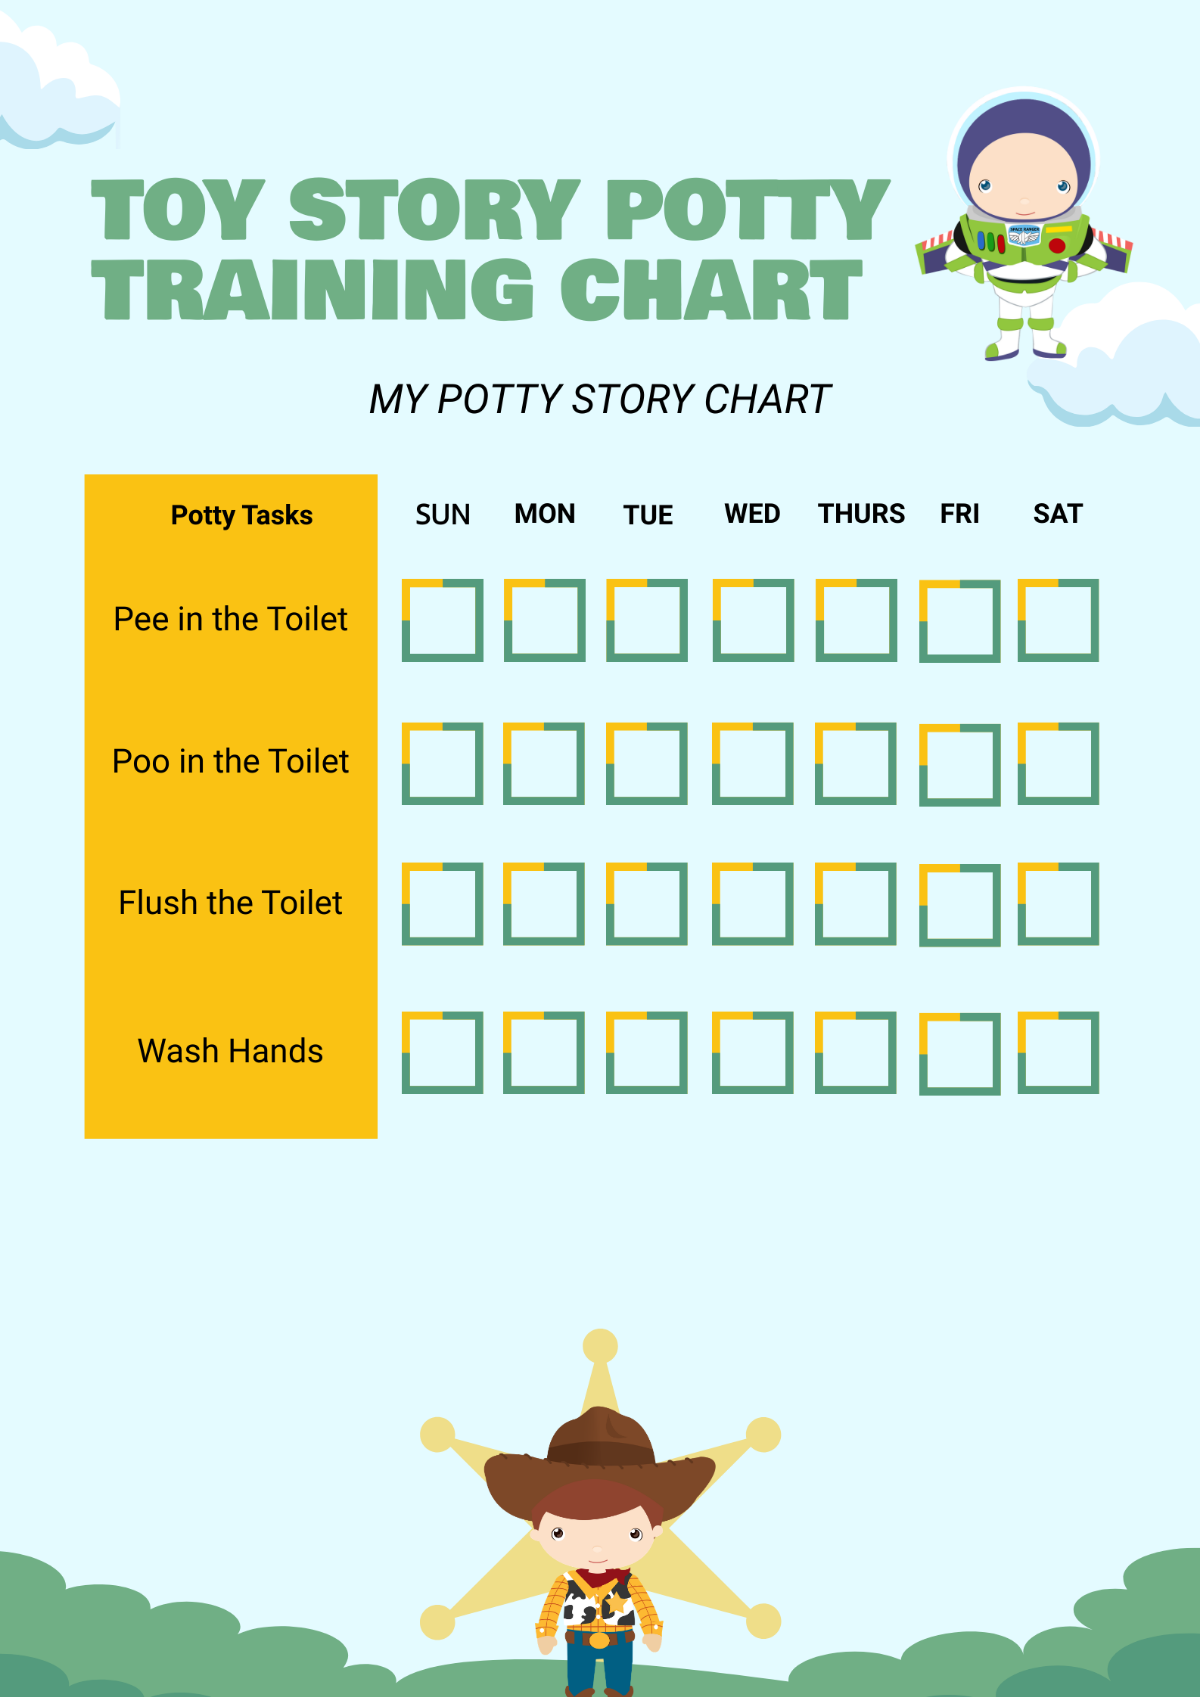 Toy Story Potty Training Chart Template